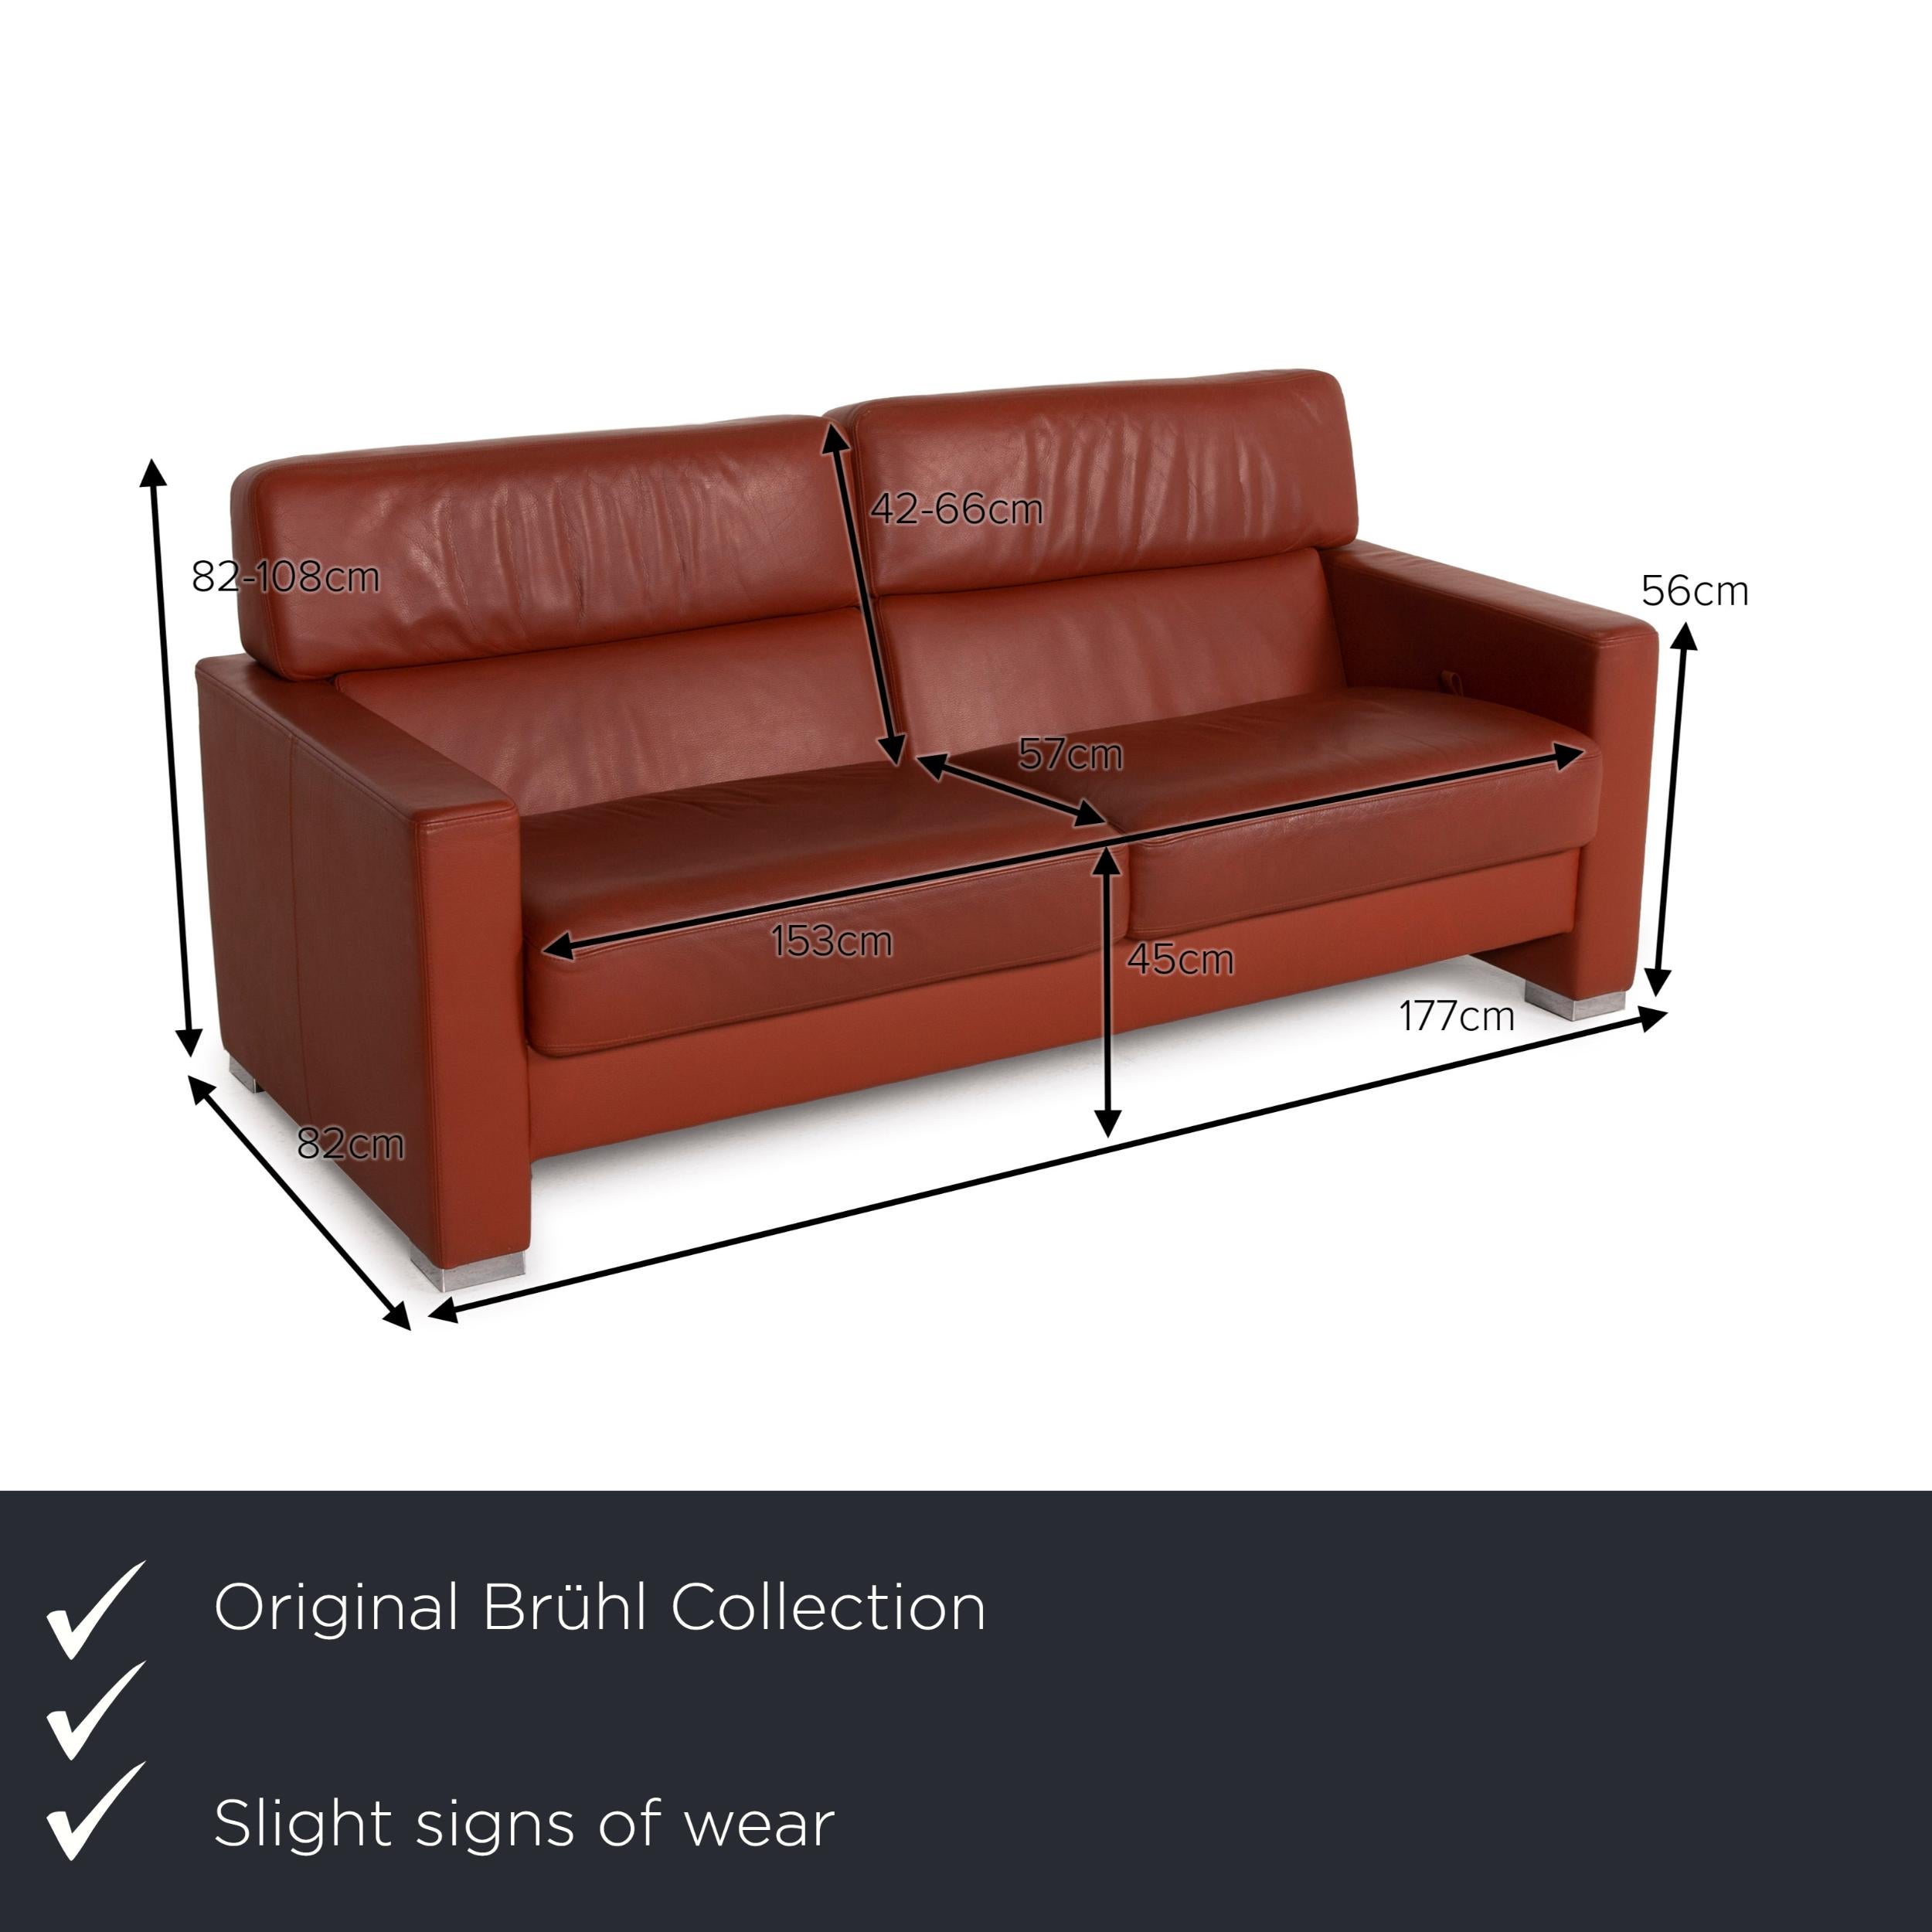 We present to you a Brühl Collection Separe leather sofa terracotta three-seater function.

Product measurements in centimeters:
 
Depth 82
Width 177
Height 82
Seat height 45
Rest height 56
Seat depth 57
Seat width 153
Back height 42.
 